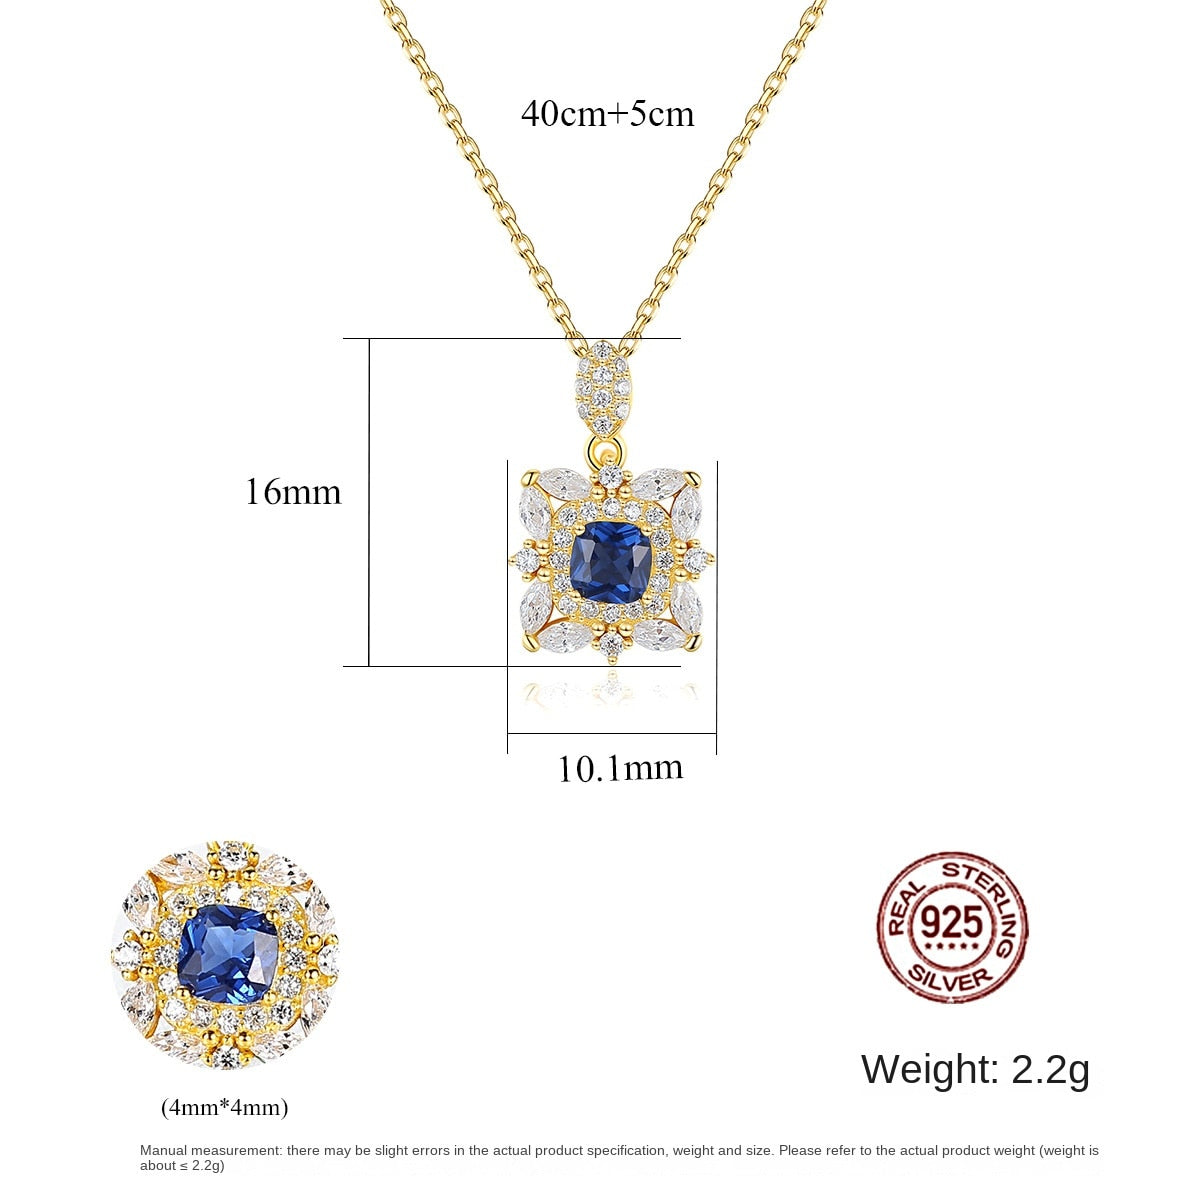 Gemstonely- Regal and Elegant: S925 Silver Necklace with Flower Pendant for Women in a Palace Style Design